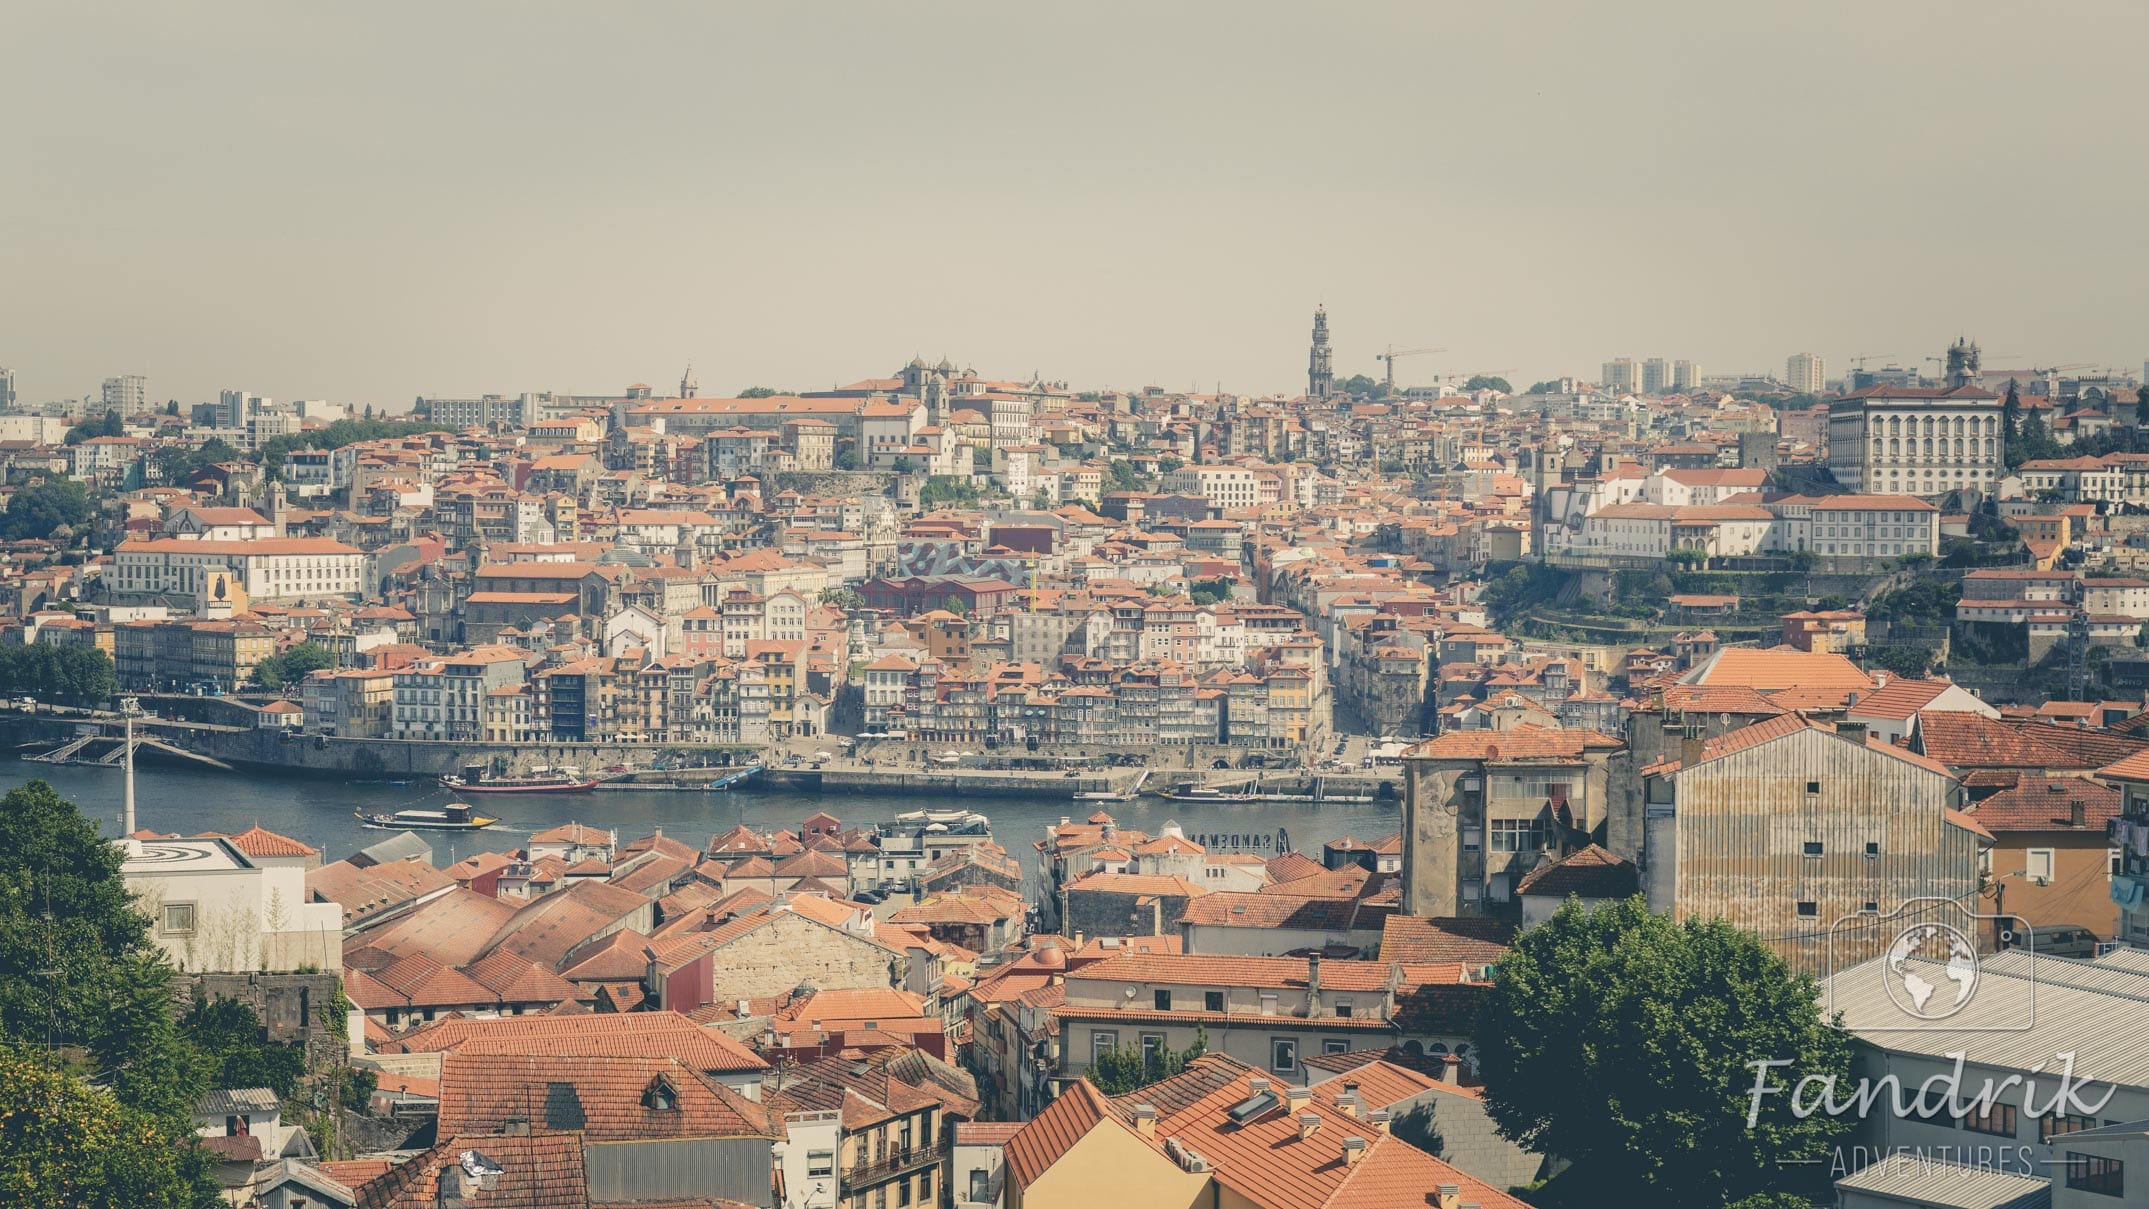 A fascinating view of the old town of Porto.